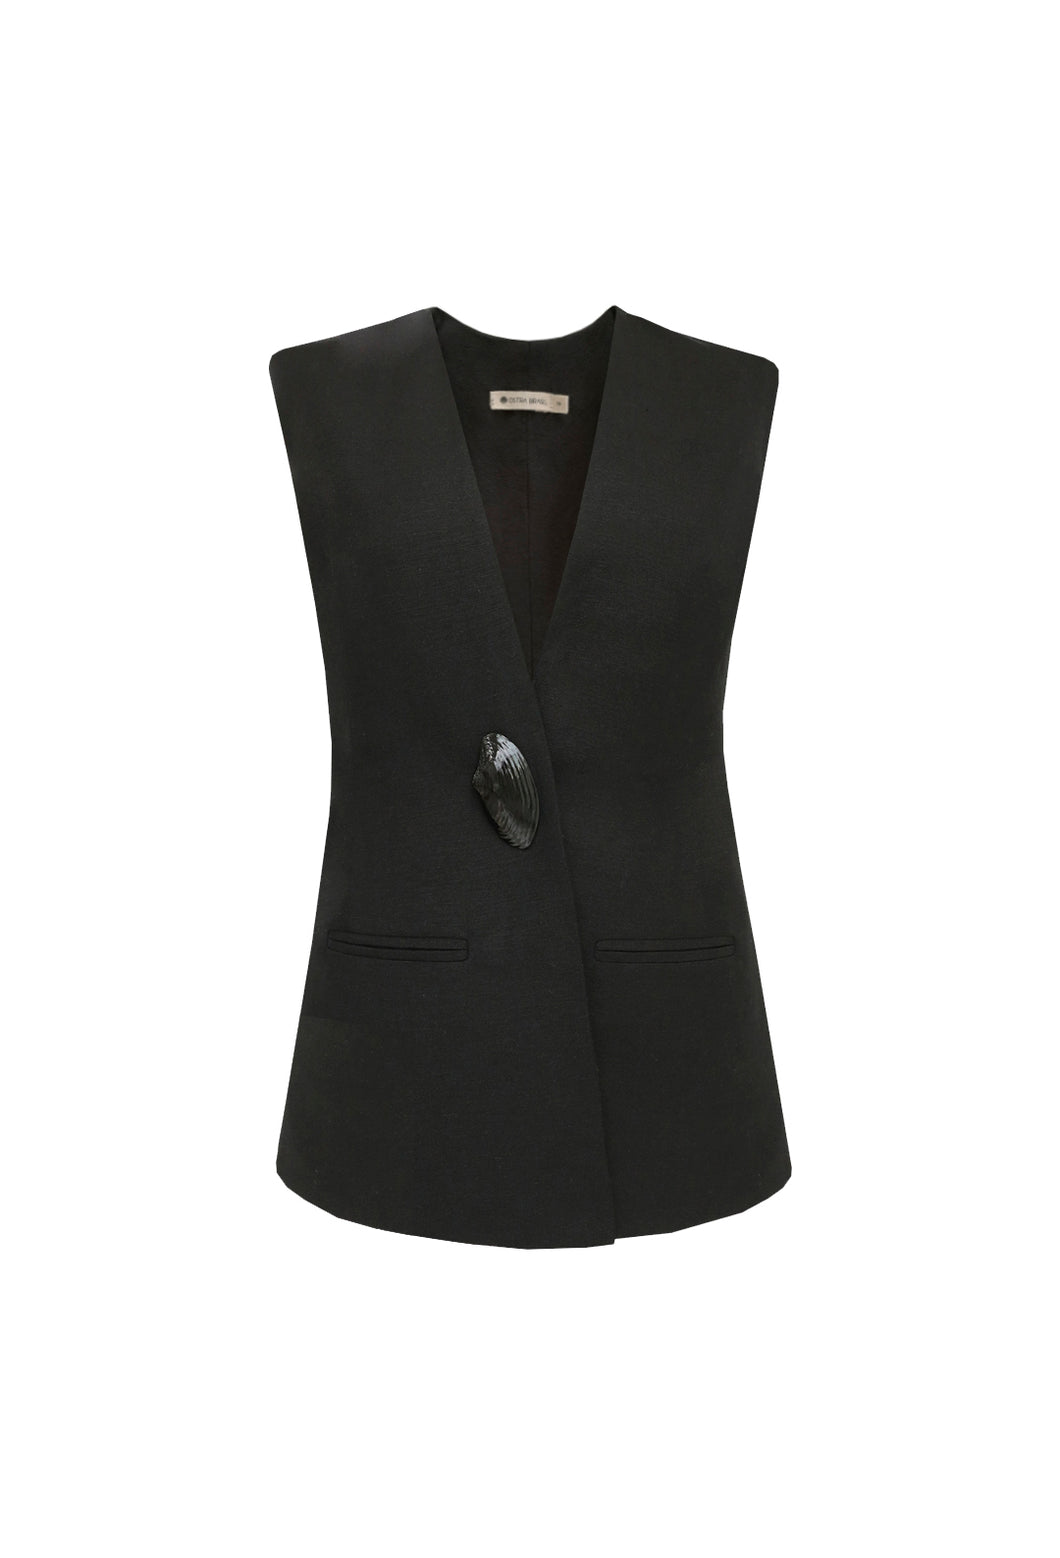 Fitted Tailoring Shell Blazer Top -  Black Linen